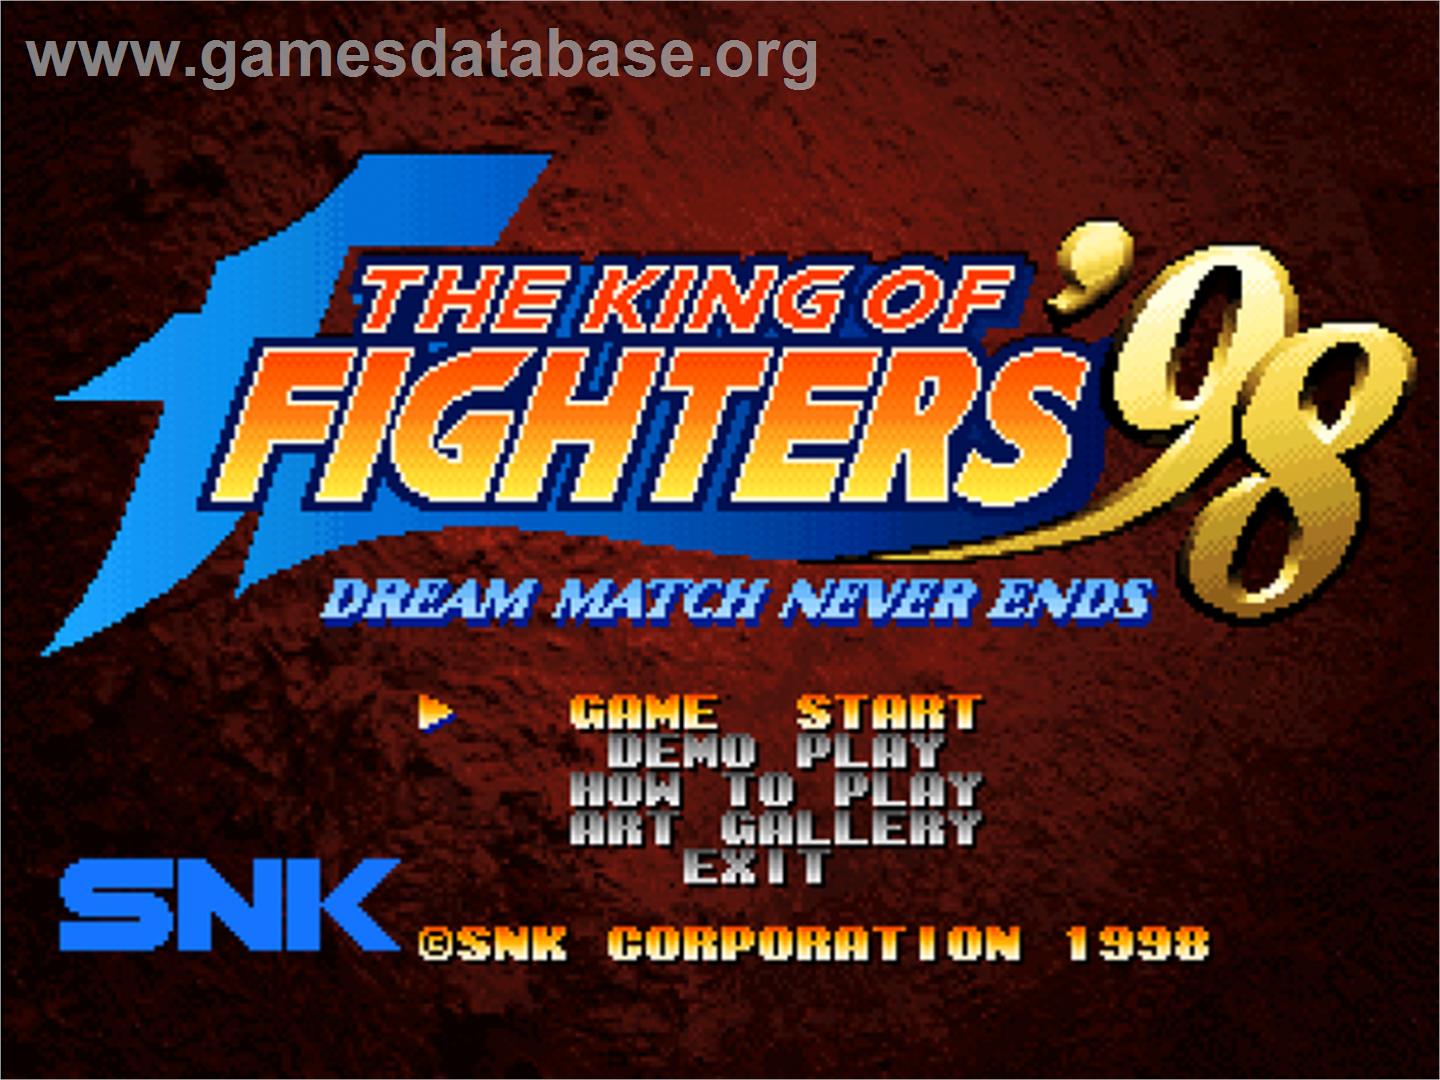 The King of Fighters '98: Dream Match Never Ends - SNK Neo-Geo CD - Artwork - Title Screen